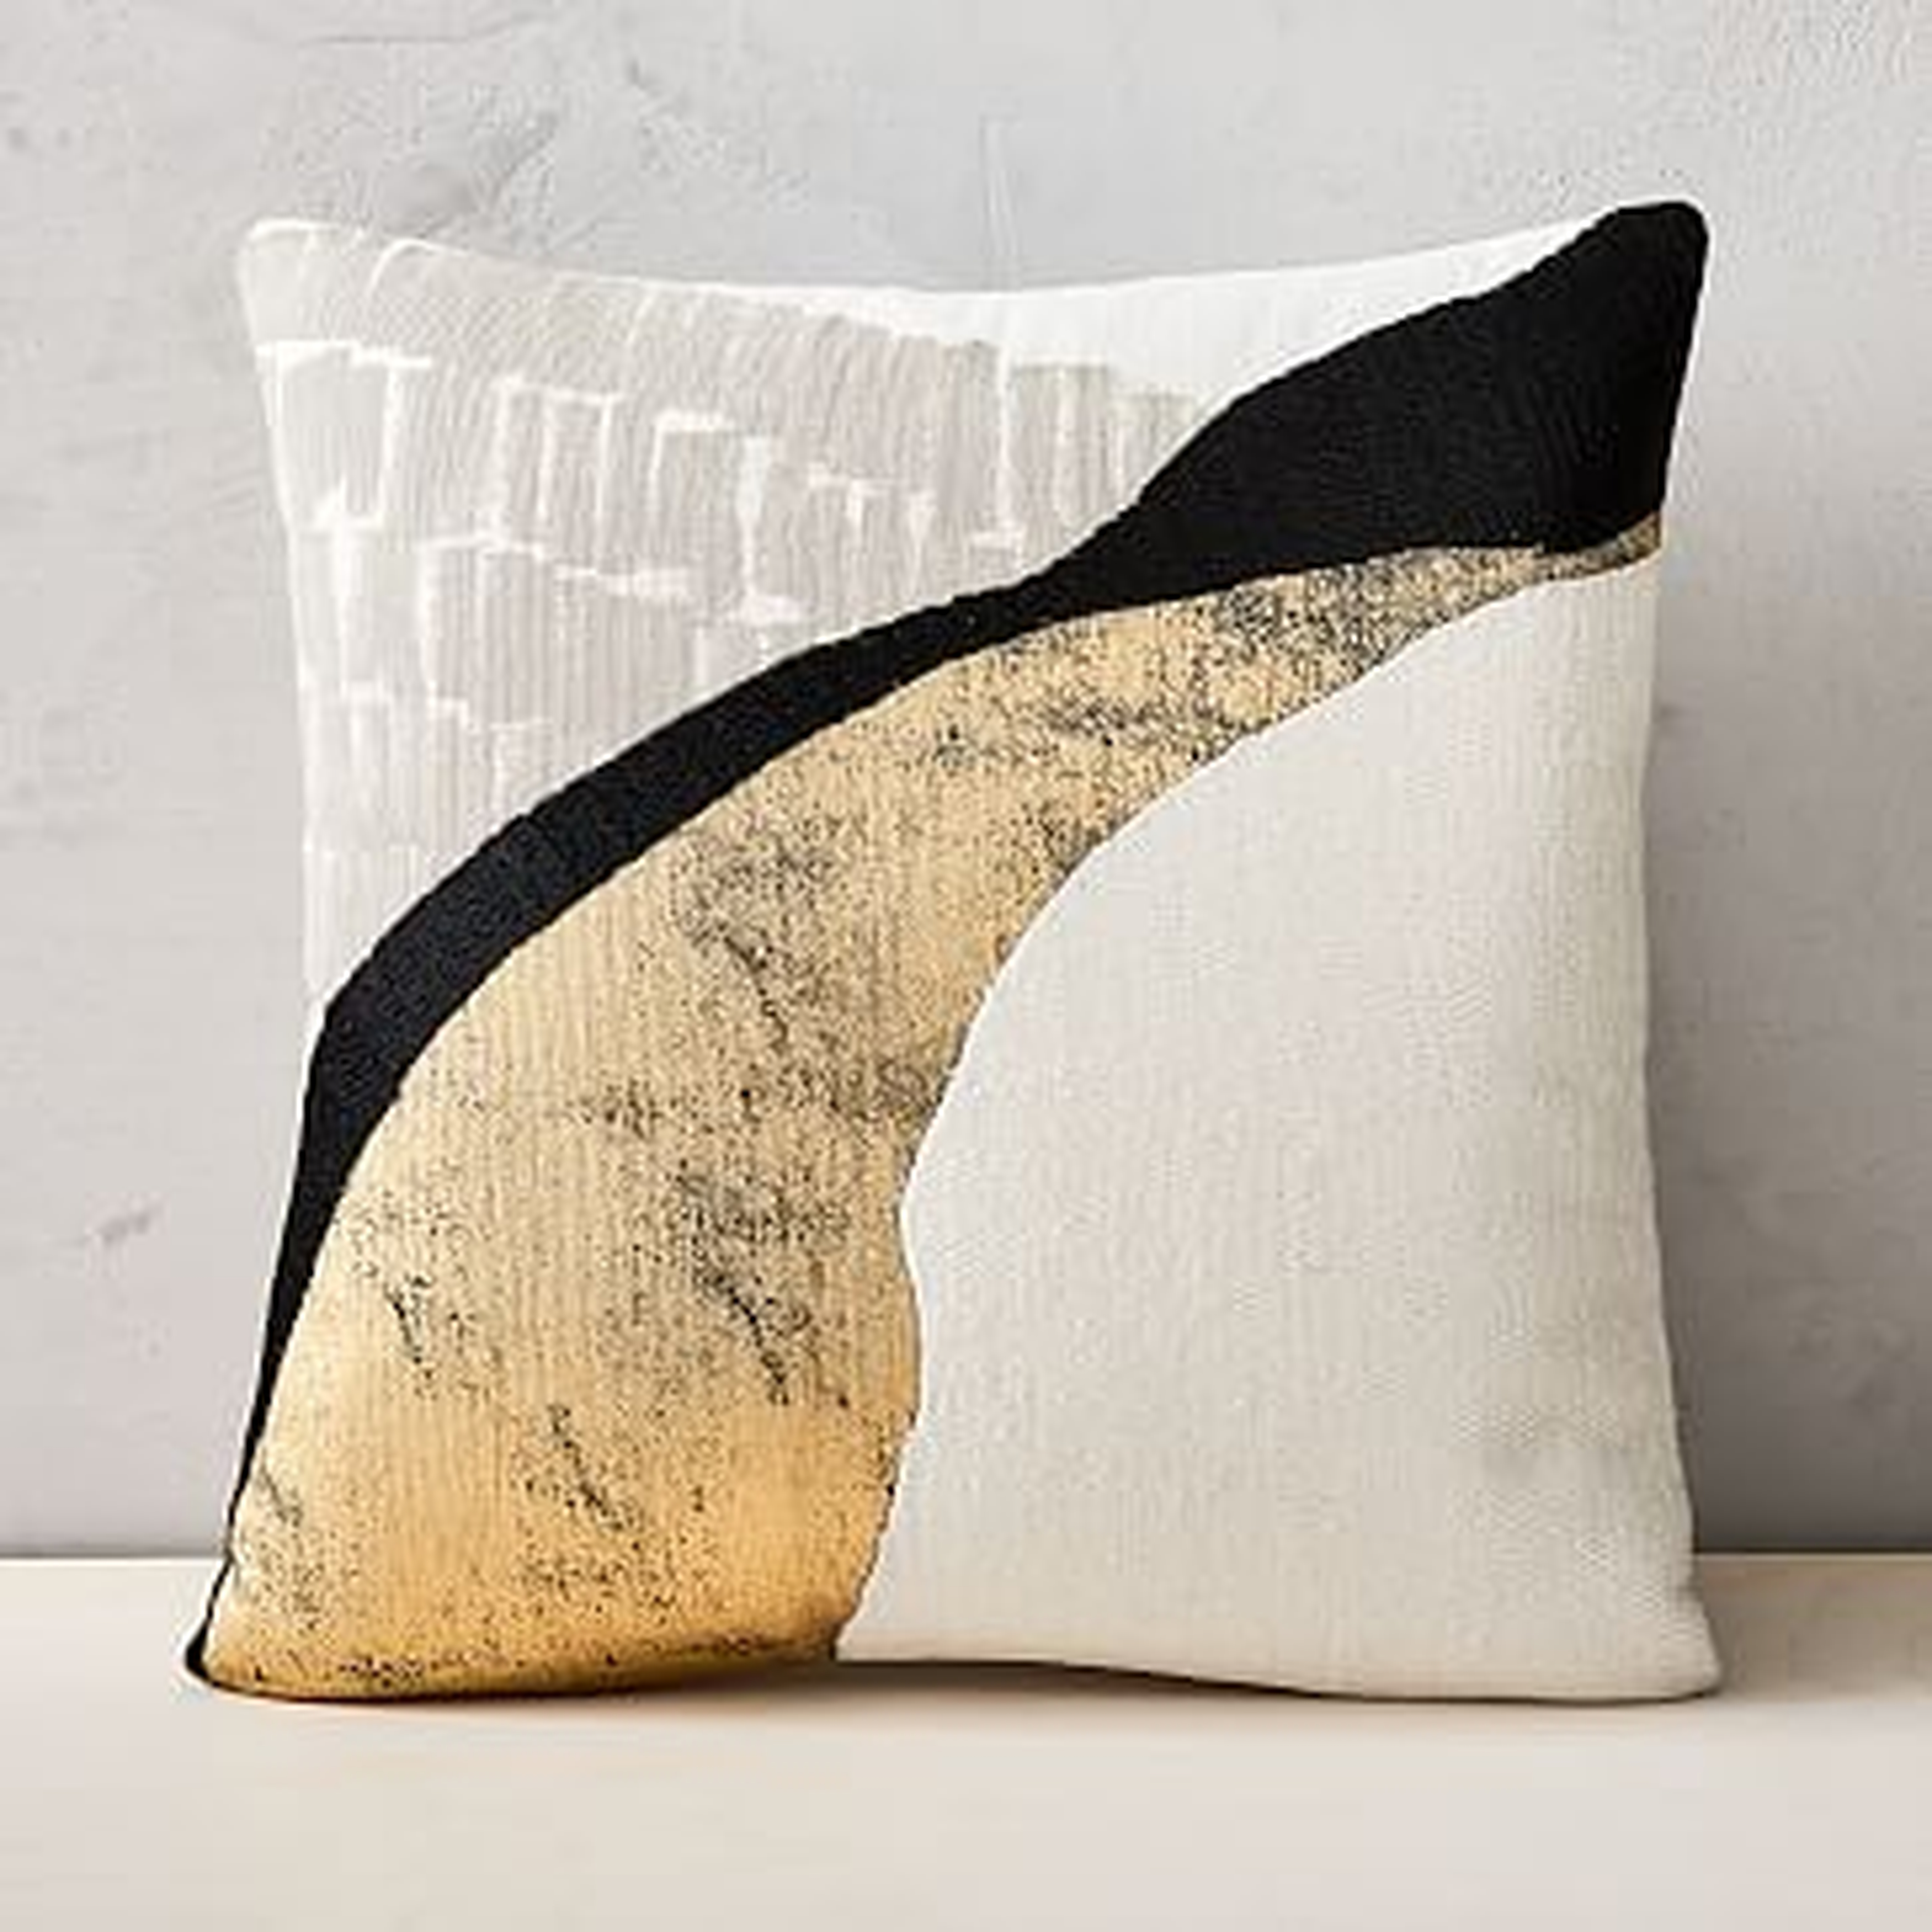 Embroidered Abstract Path Pillow Cover, 18"x18", White, Set of 2 - West Elm